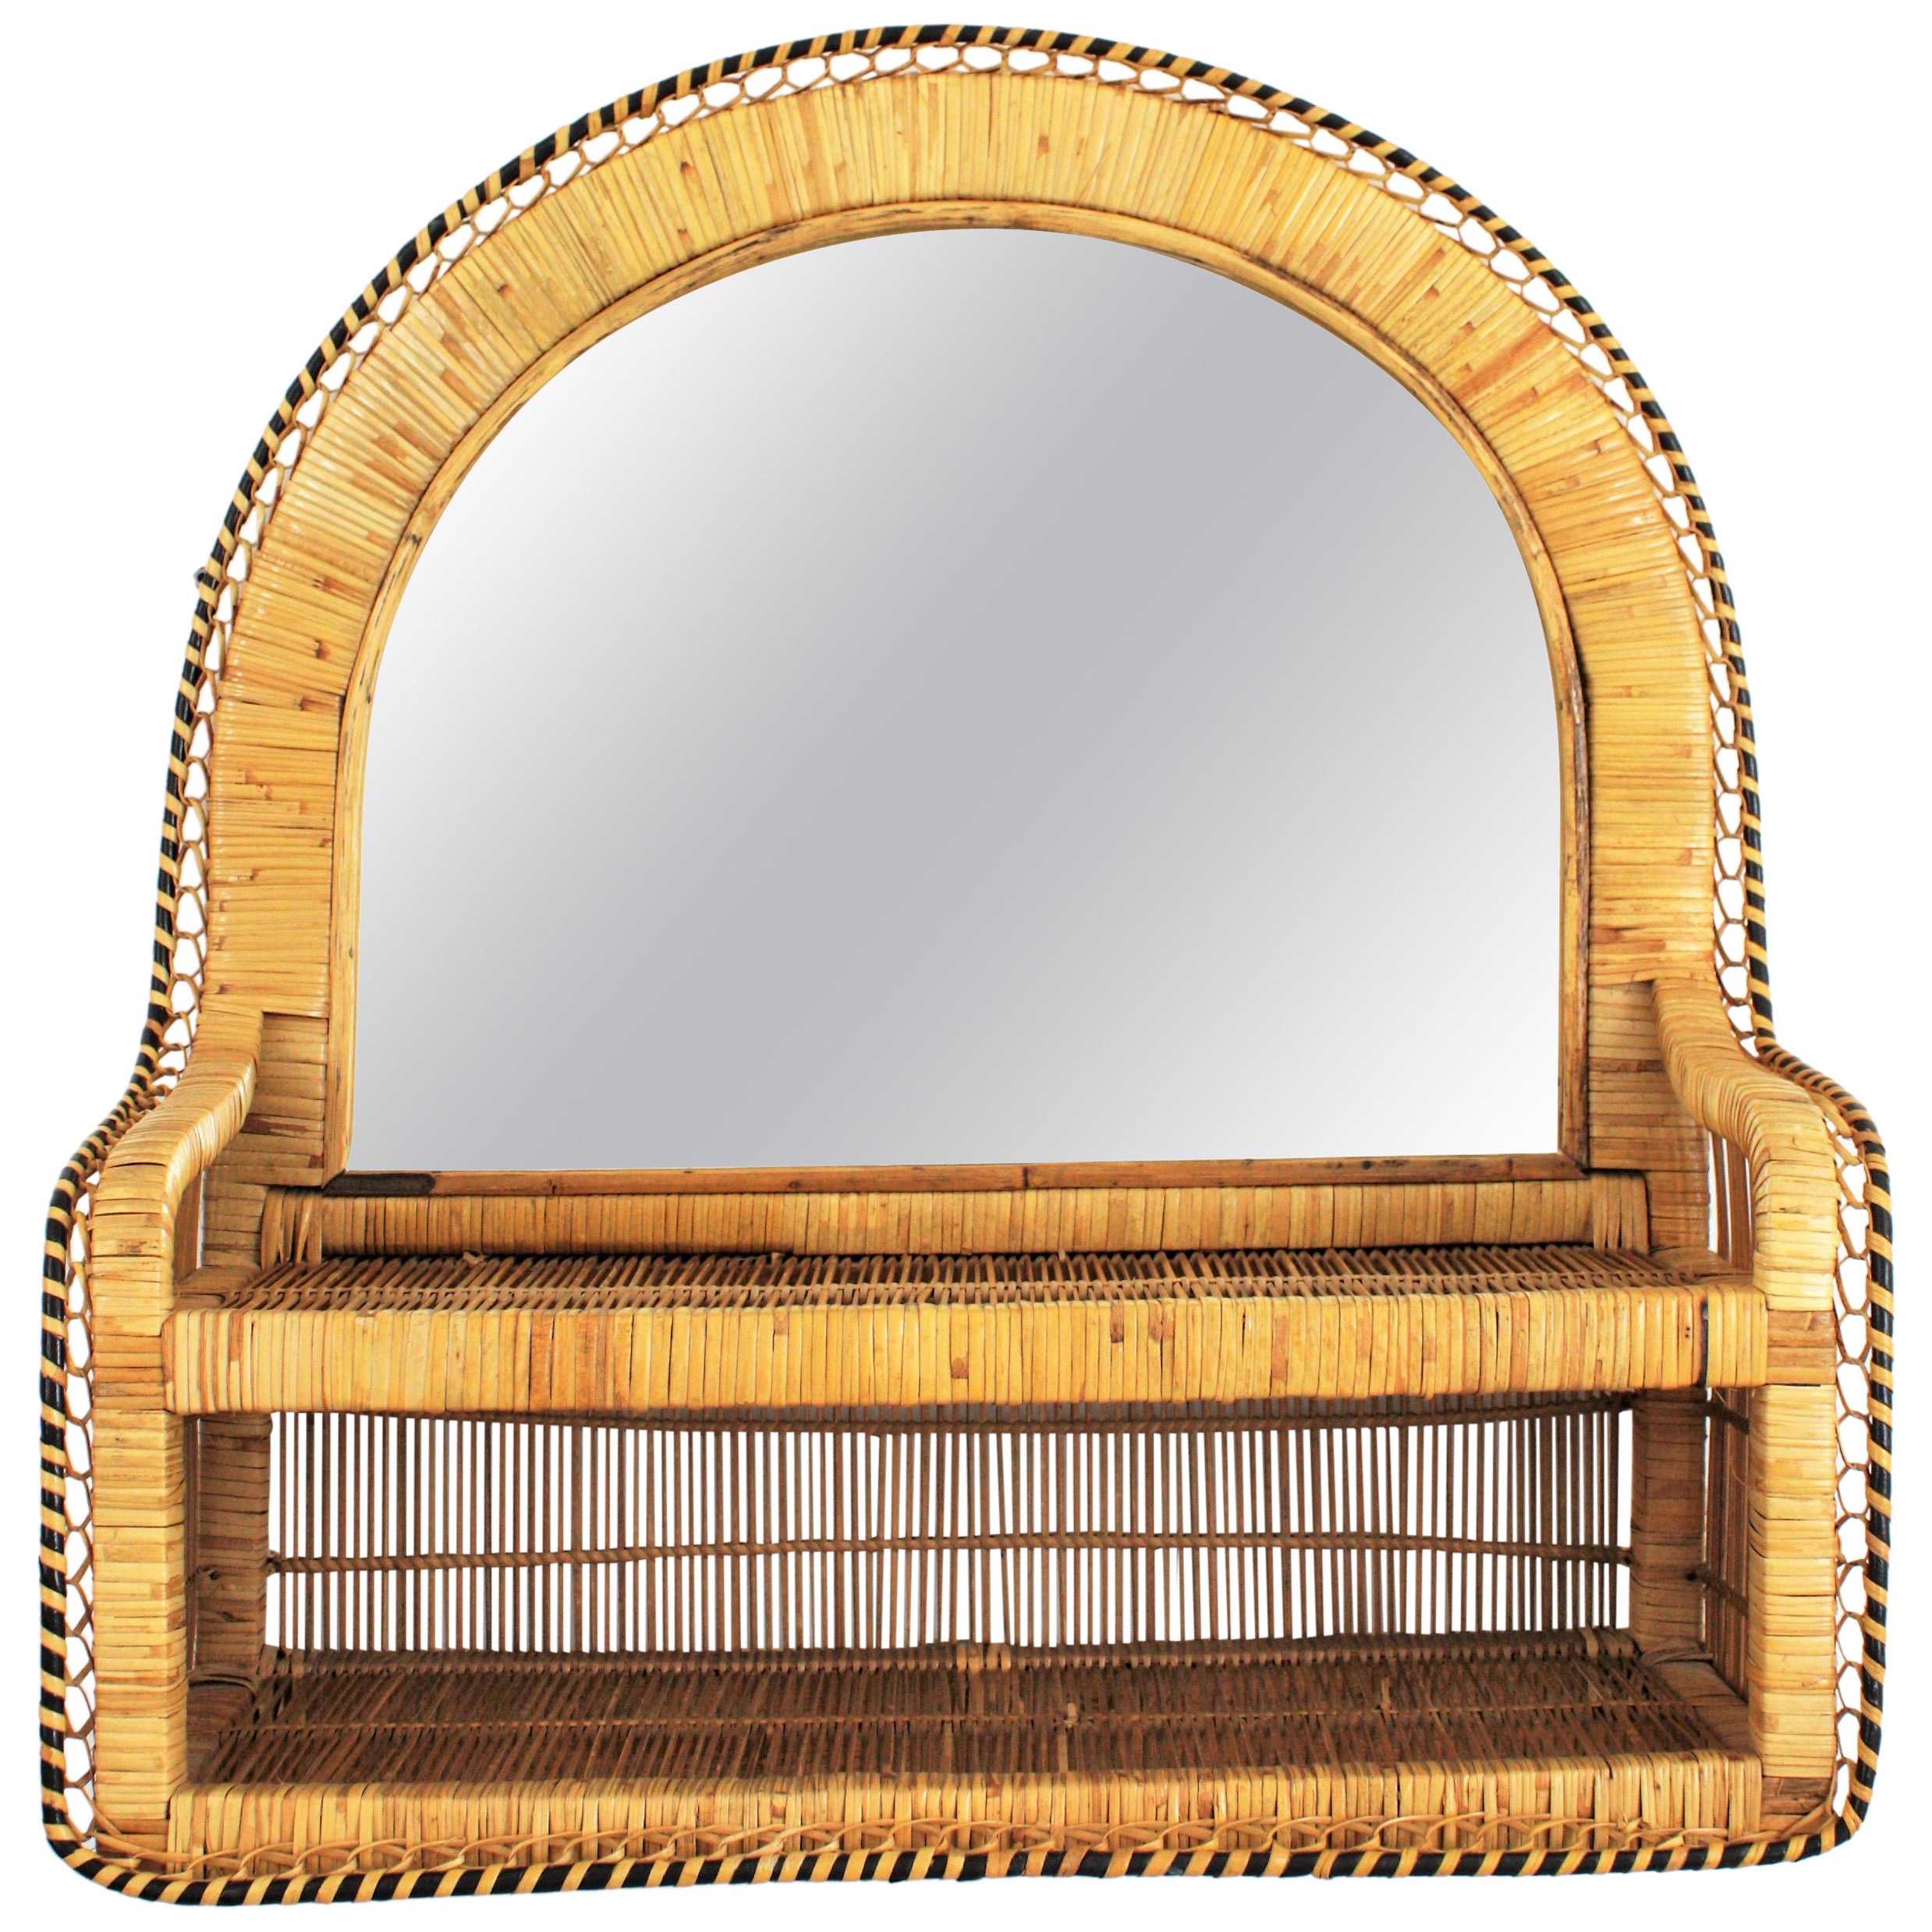 Eye-catching Spanish handwoven bicolor rattan and wicker shelf mirror in the style of the Emmanuelle peacock chair. Spain, 1970s.
The frame has a semi oval shape and a meticulous handcrafted work that makes this piece highly decorative and full of